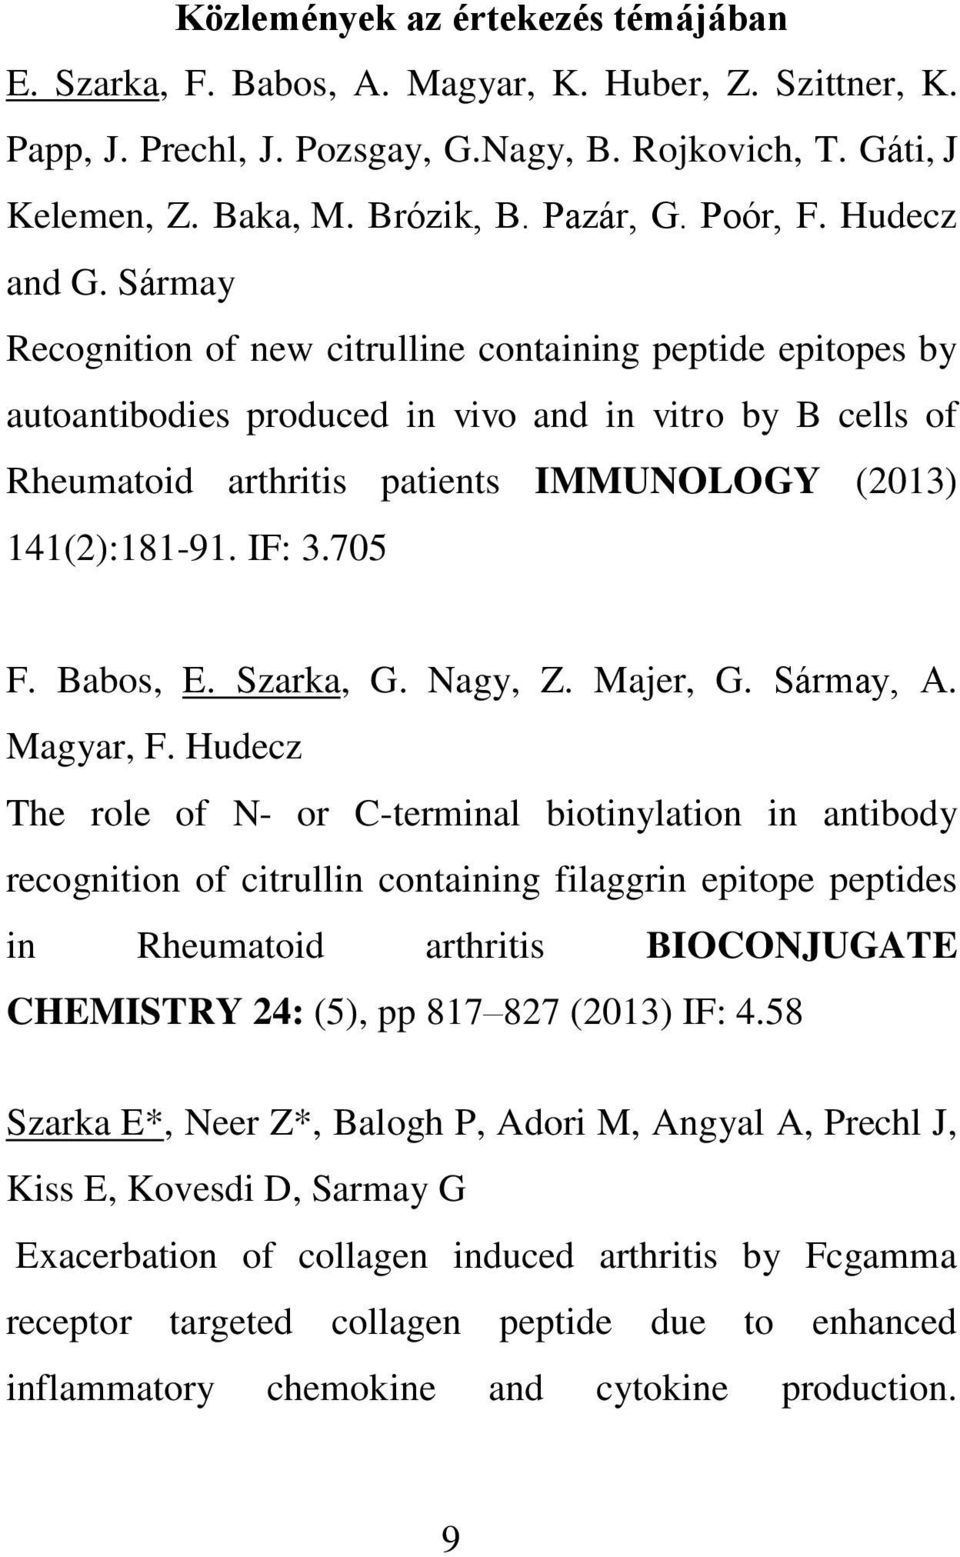 Sármay Recognition of new citrulline containing peptide epitopes by autoantibodies produced in vivo and in vitro by B cells of Rheumatoid arthritis patients IMMUNOLOGY (2013) 141(2):181-91. IF: 3.